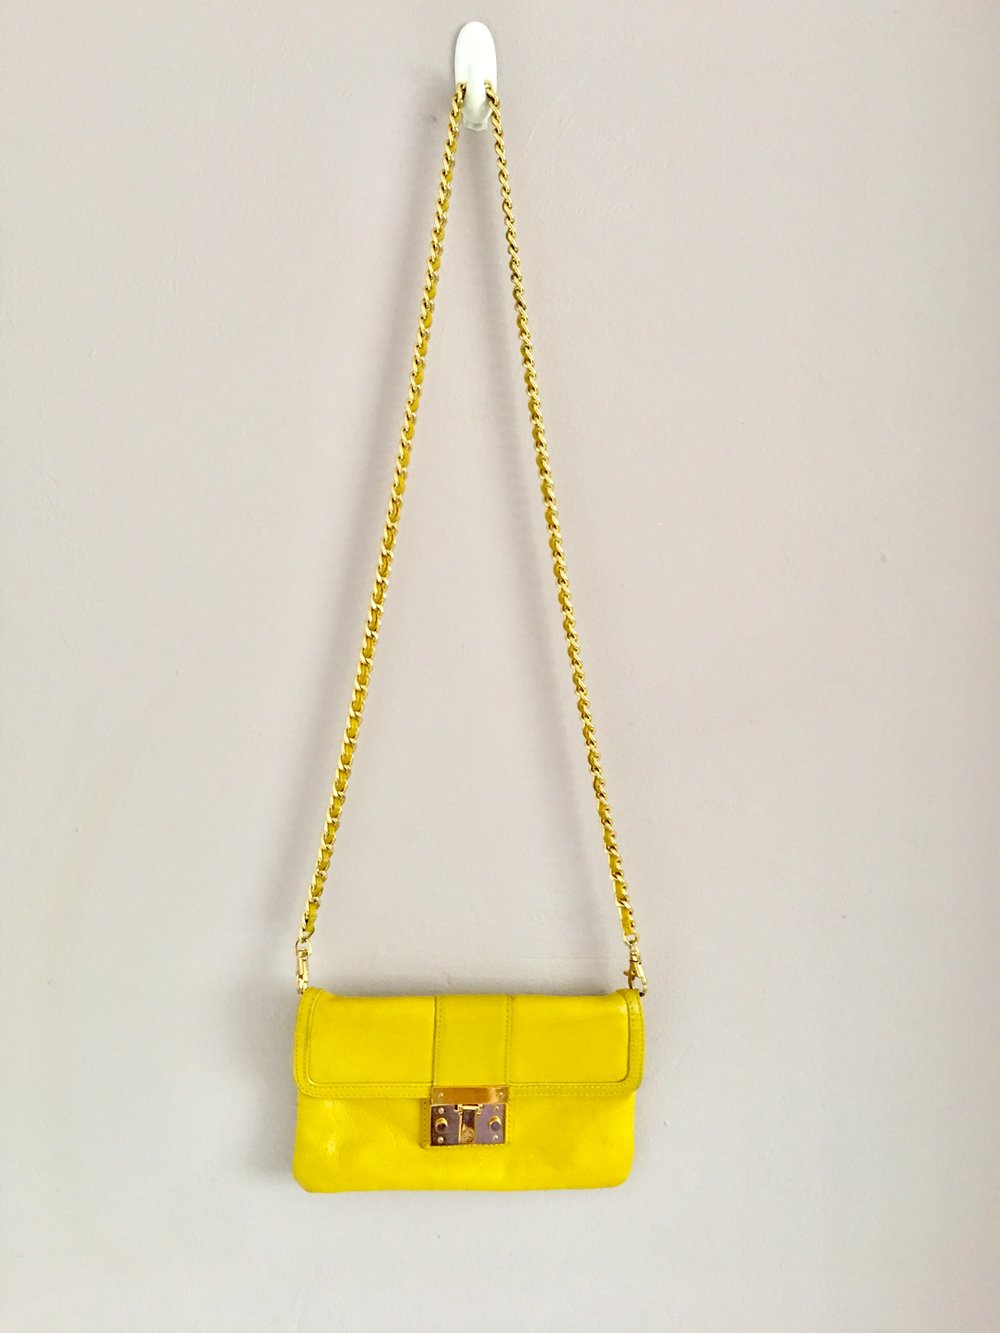 Tory Burch Crossbody Small Yellow Leather Bag with Chain — FLAMINGO SEAFOOD